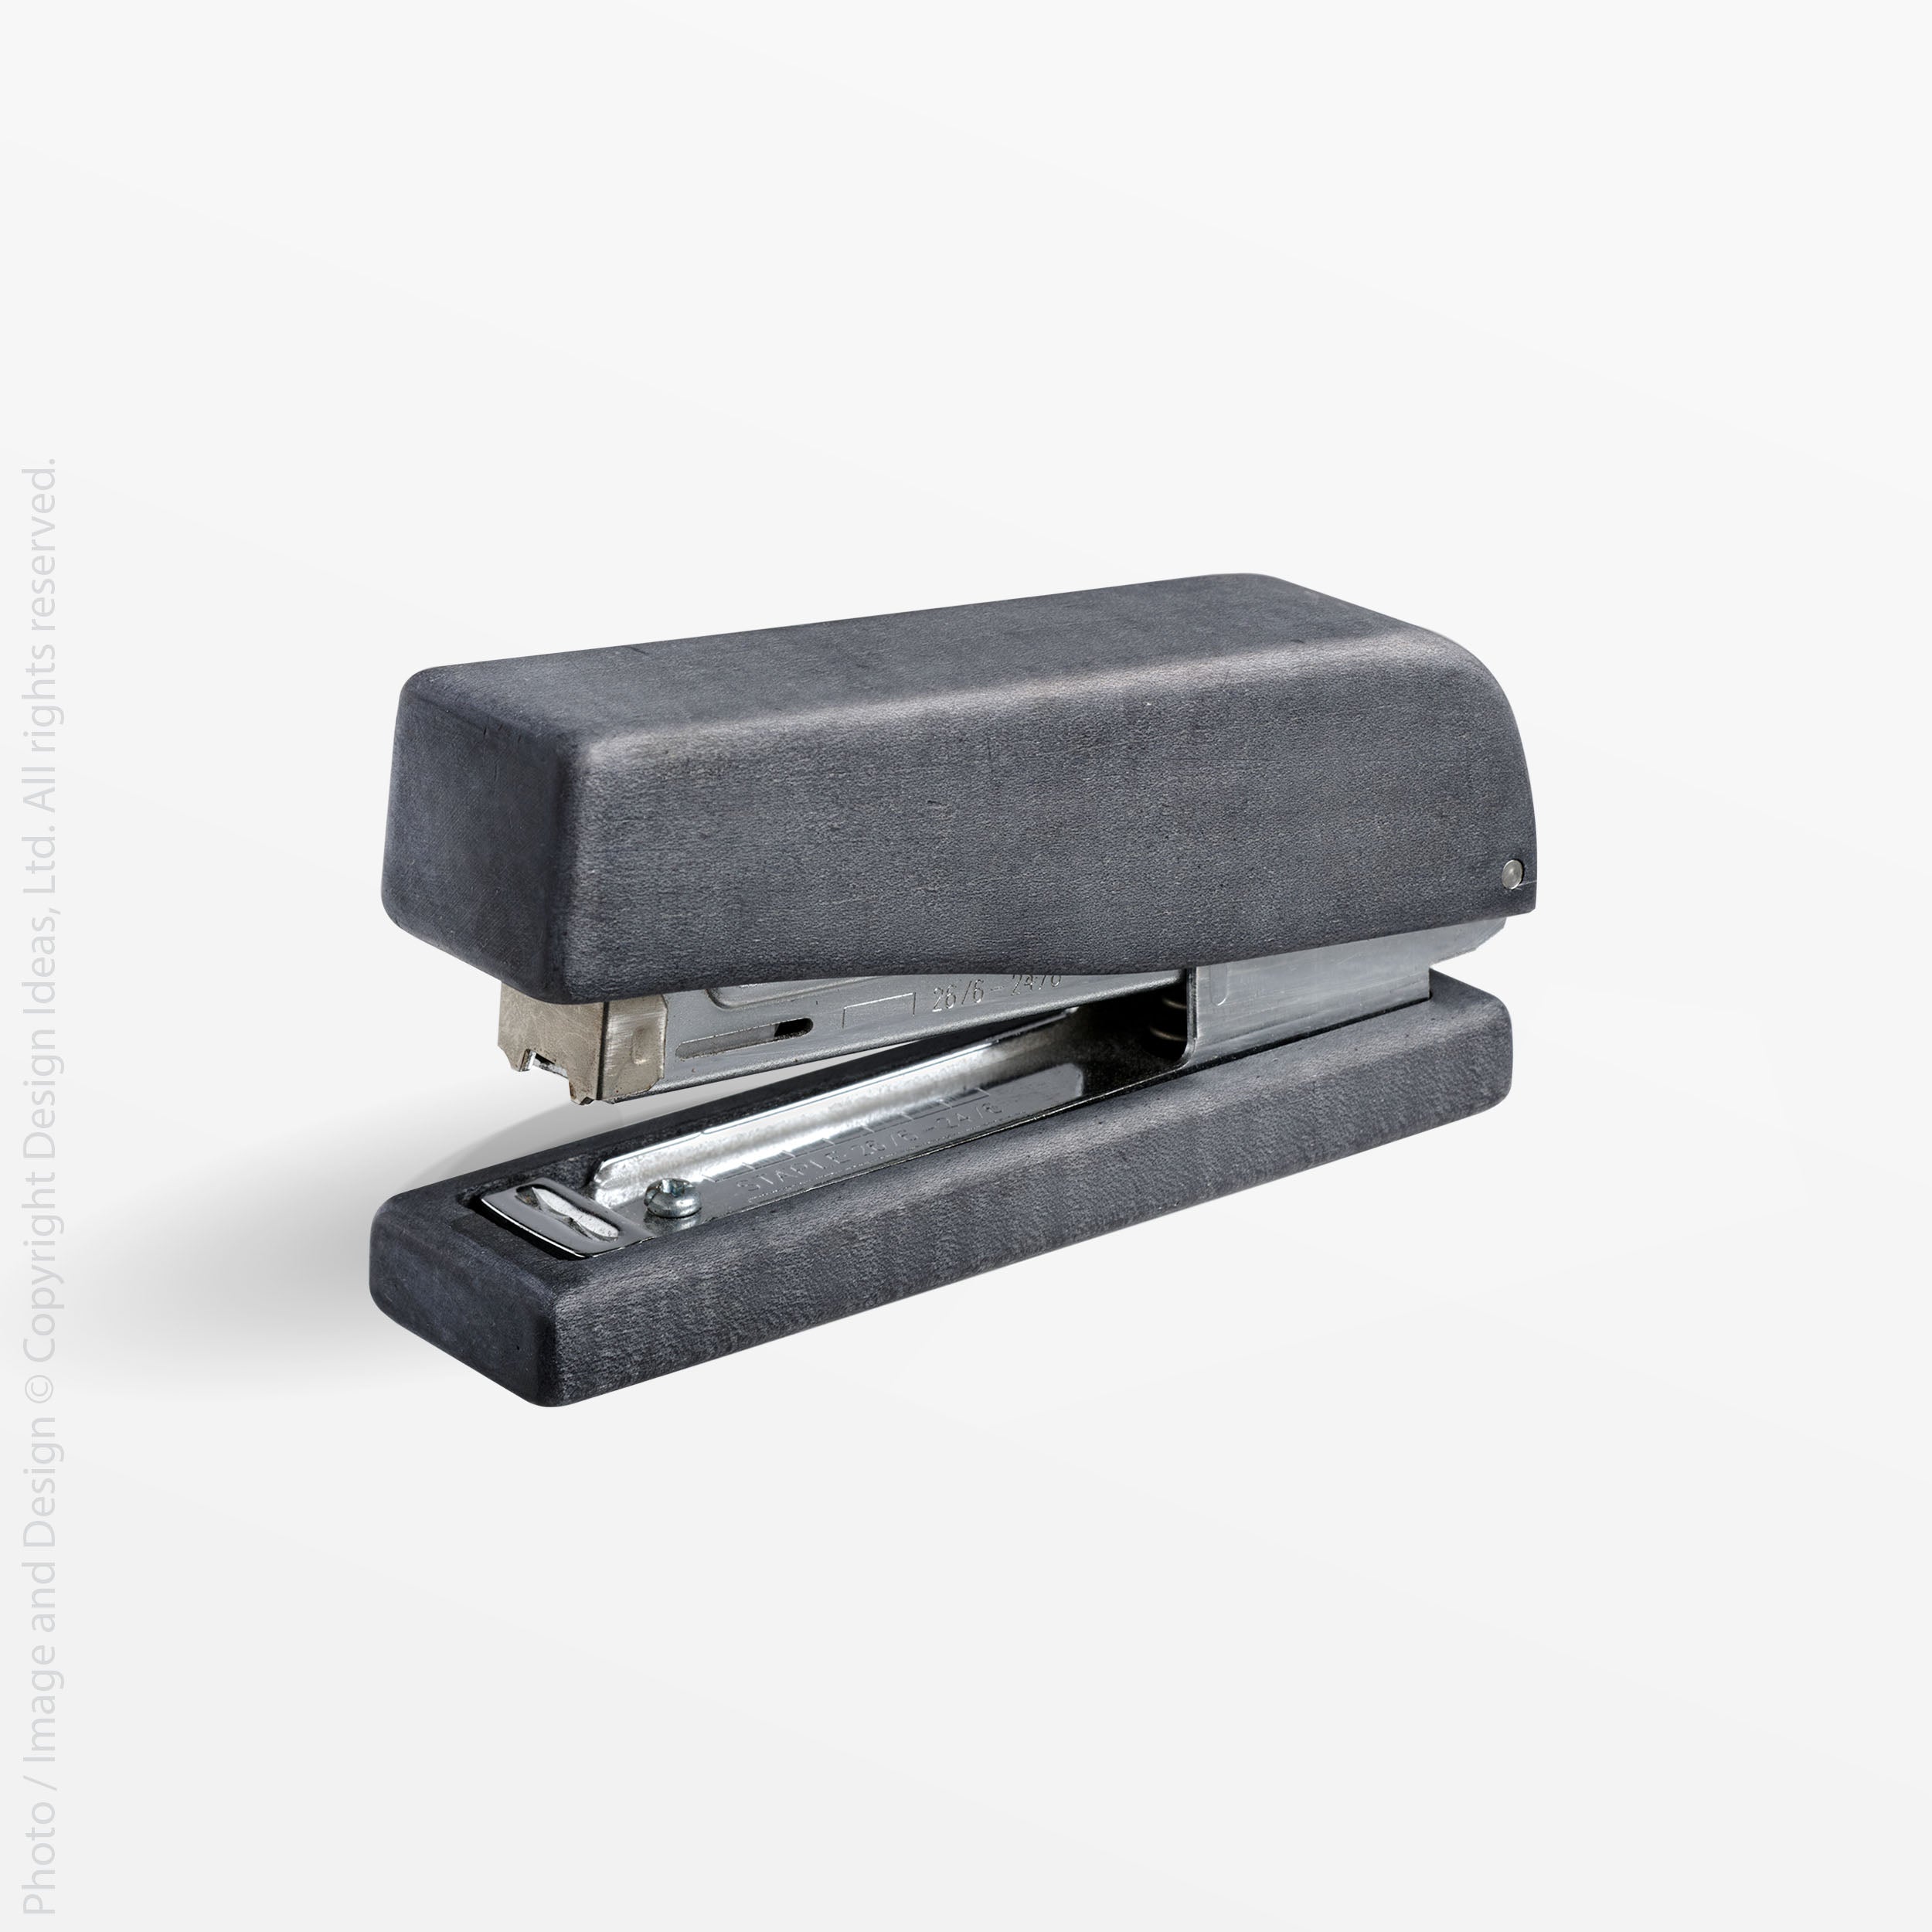 Cokala™ stapler - Black | Image 2 | Premium Desk Accessory from the Cokala collection | made with Sycamore for long lasting use | texxture